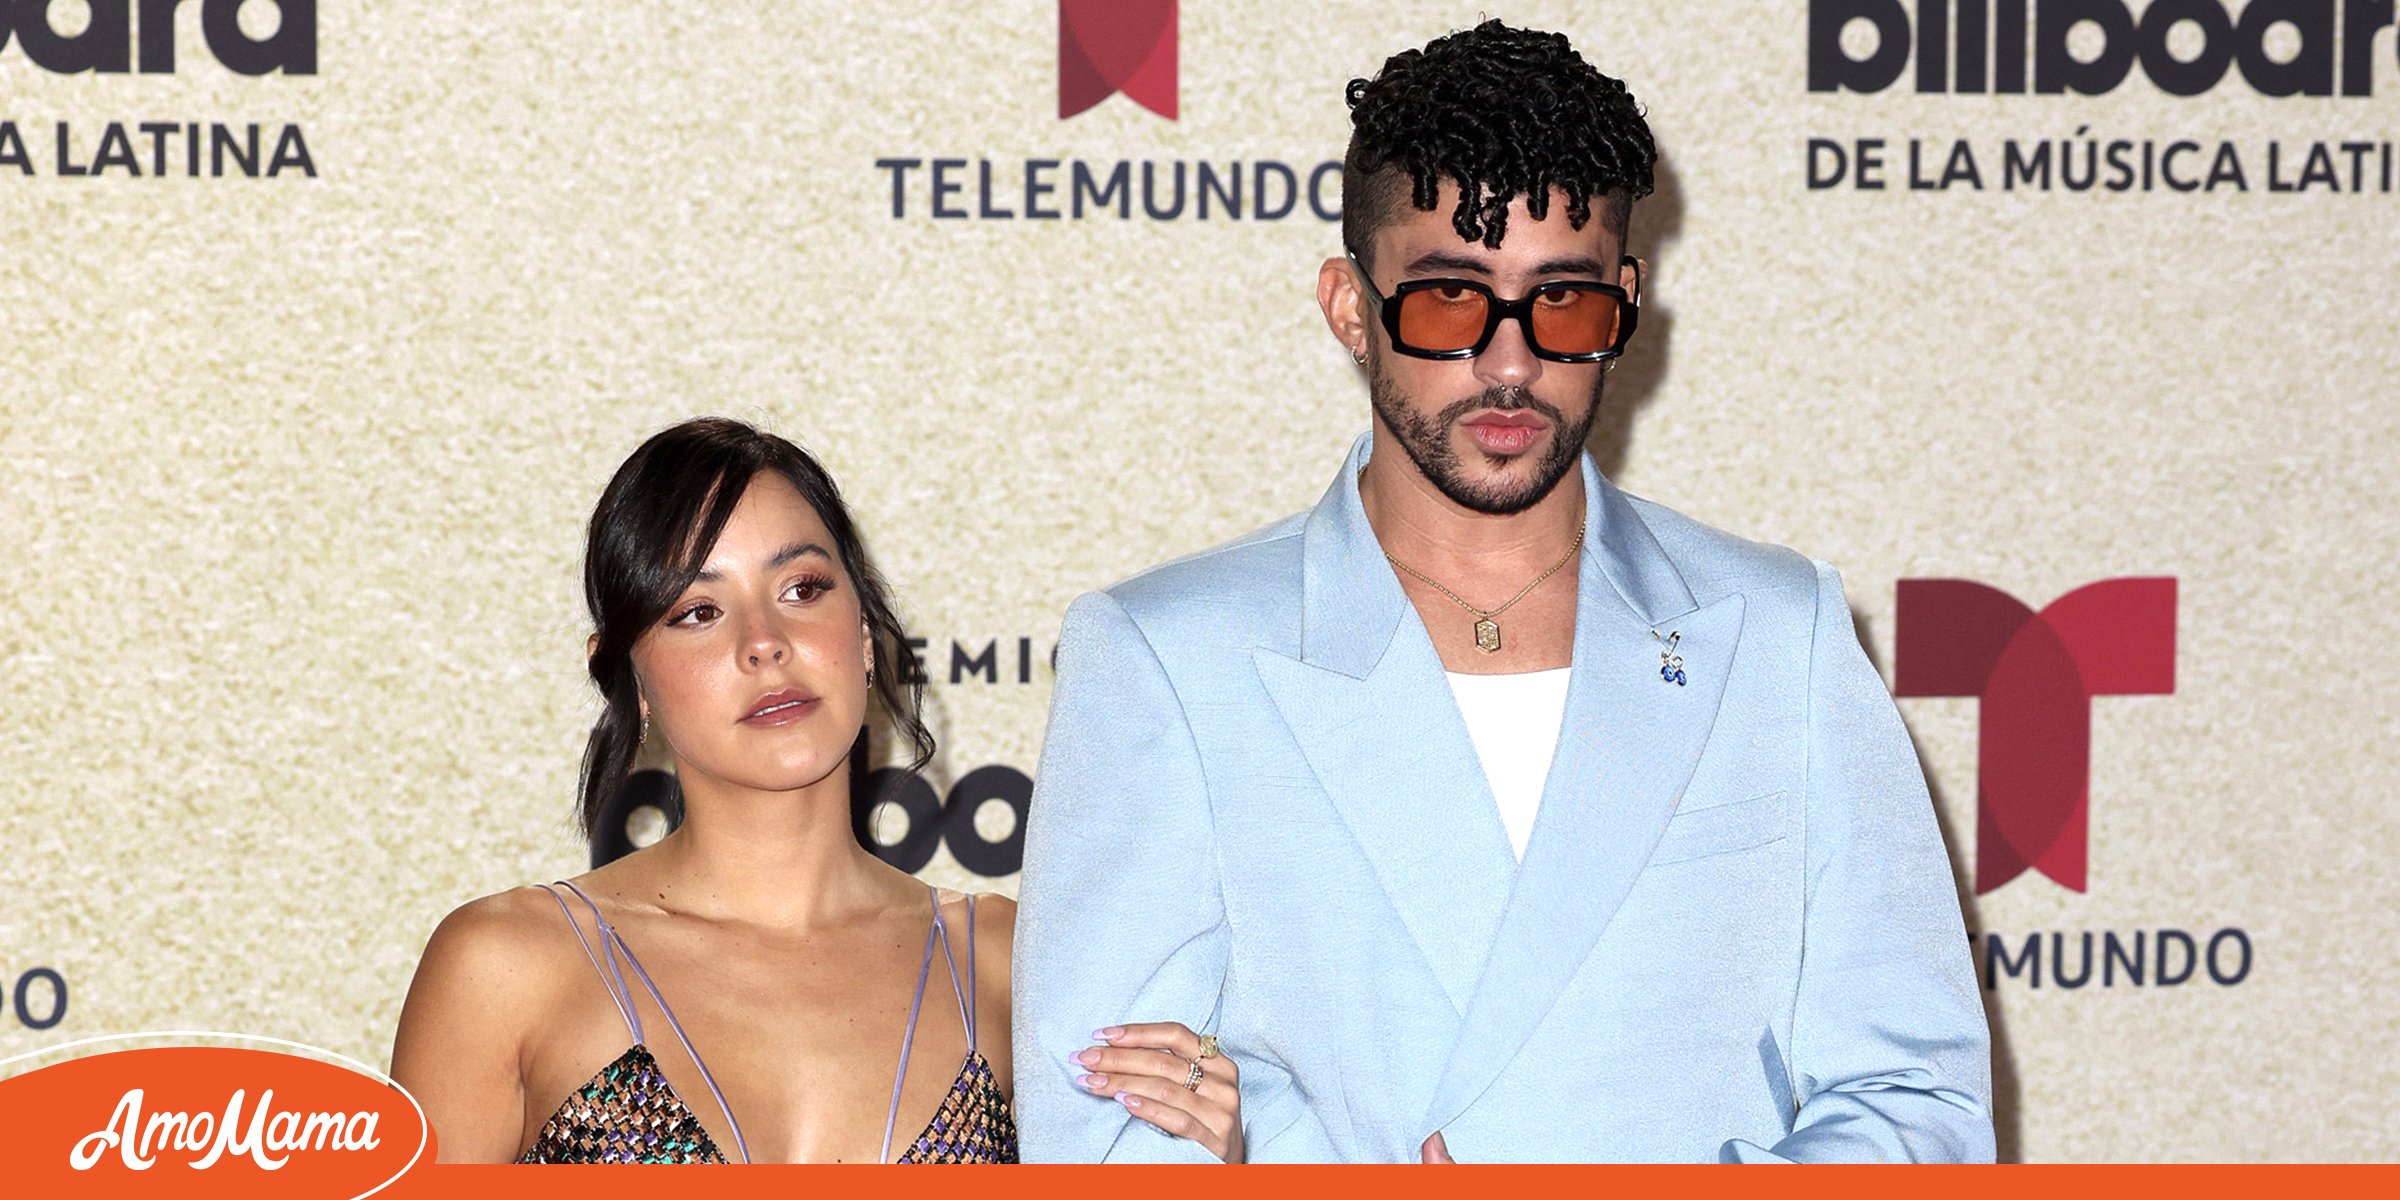 Gabriela Berlingeri Helped Bad Bunny When He Needed It Most Their Relationship Timeline From The First Meeting To The Rumored Breakup